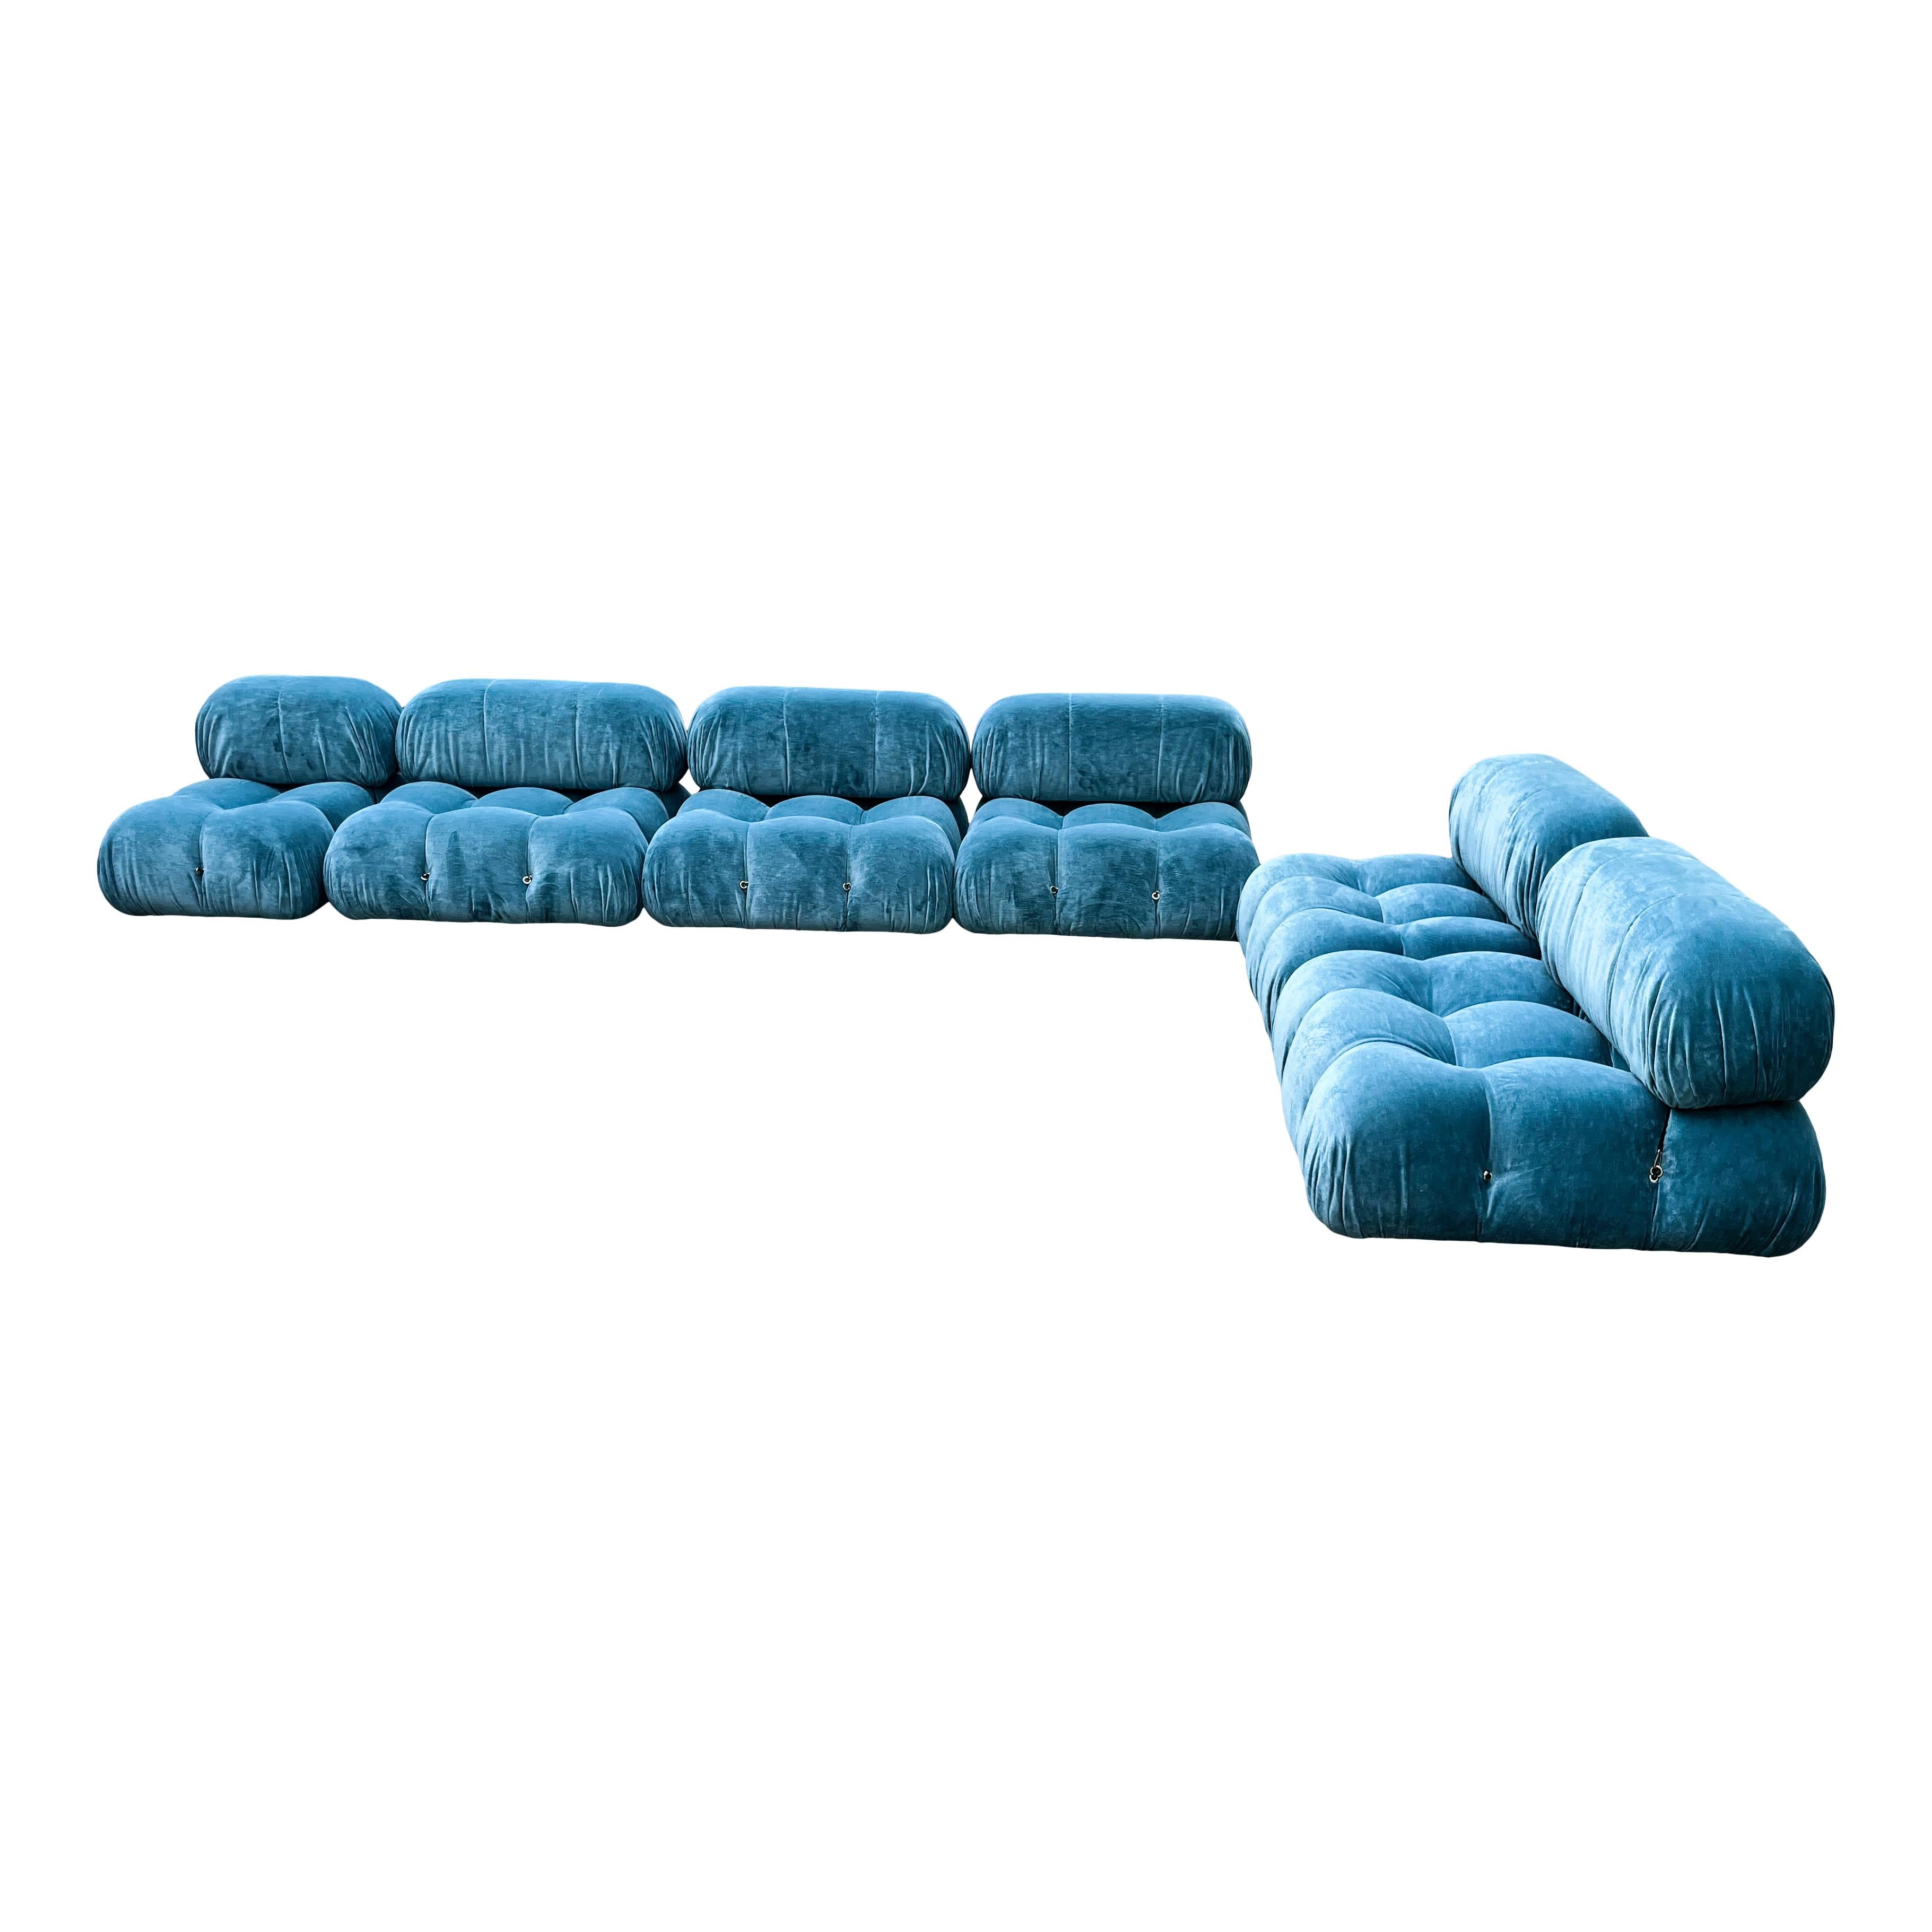 Camaleonda sofa, designed by Mario Bellini and manufactured by B&B Italia in 1972.
The set features six modules with backrest.
High quality Italian azure linen velvet upholstery.
Fully restored in Italy.
 
Mario Bellini (1935-) is trained as an